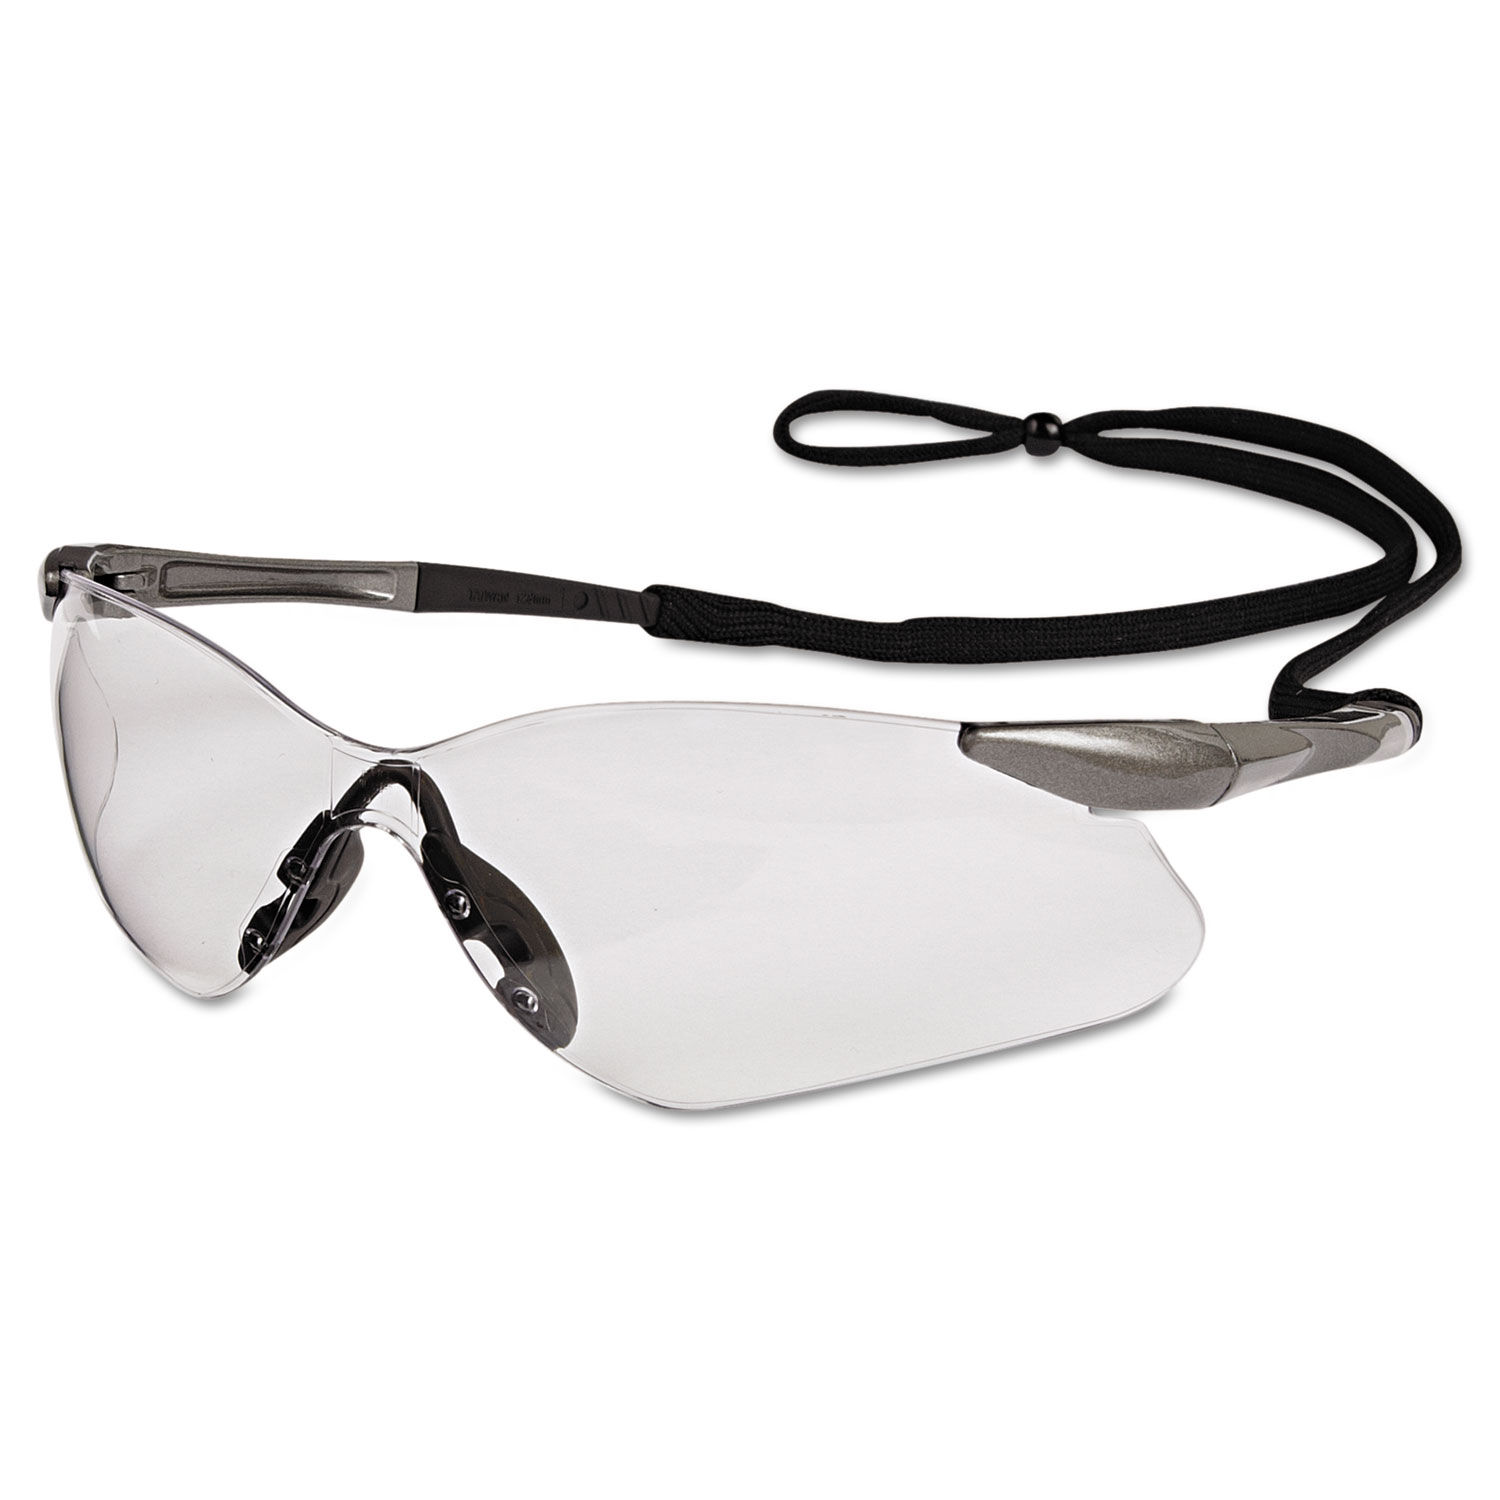 JACKSON SAFETY 20470 Vl Safety Glasses With Gunmetal Frame And Clear 